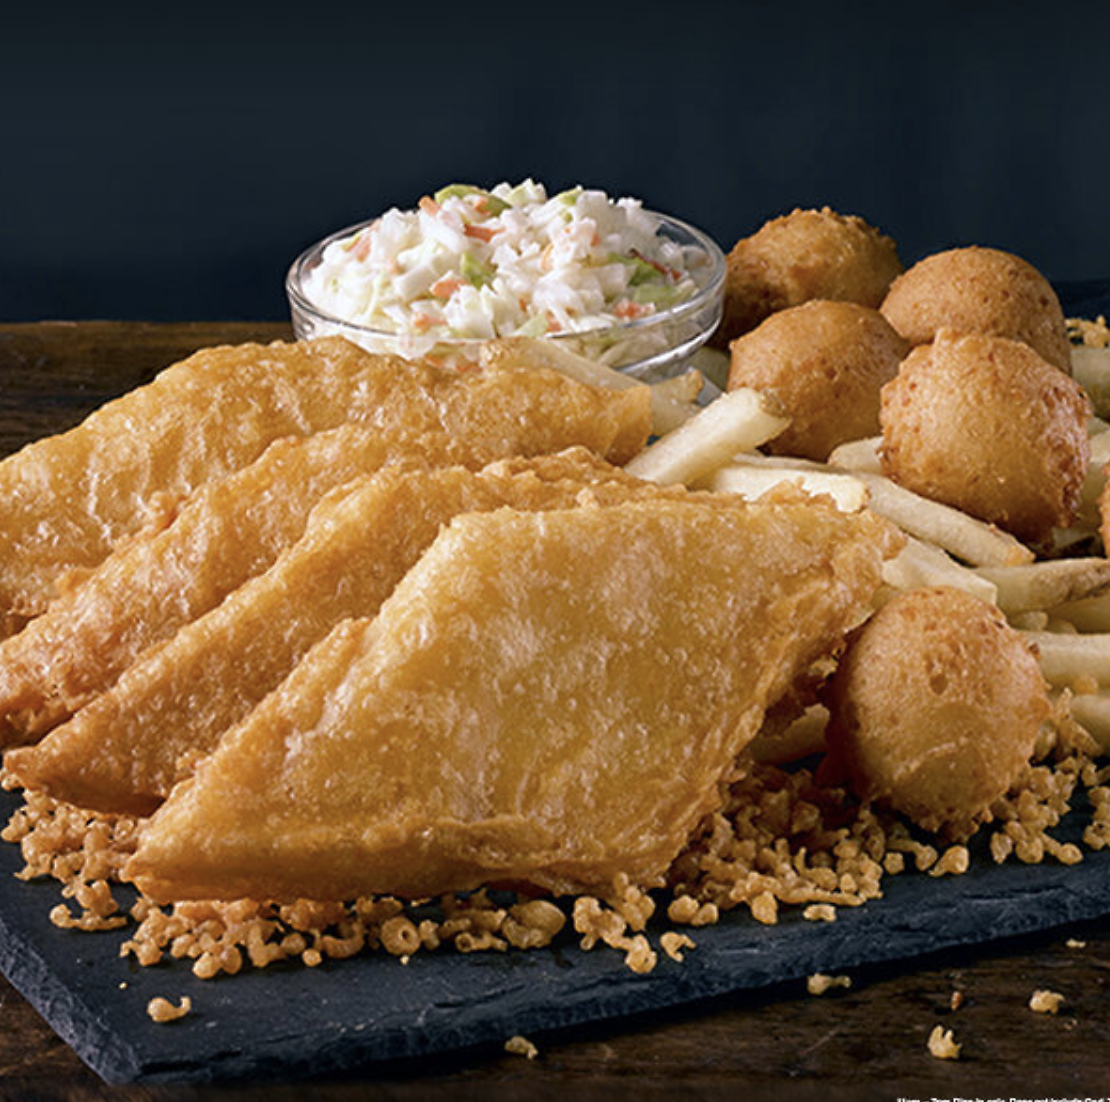 $7.99 for All You Can Eat Sunday at Long John Silver’s